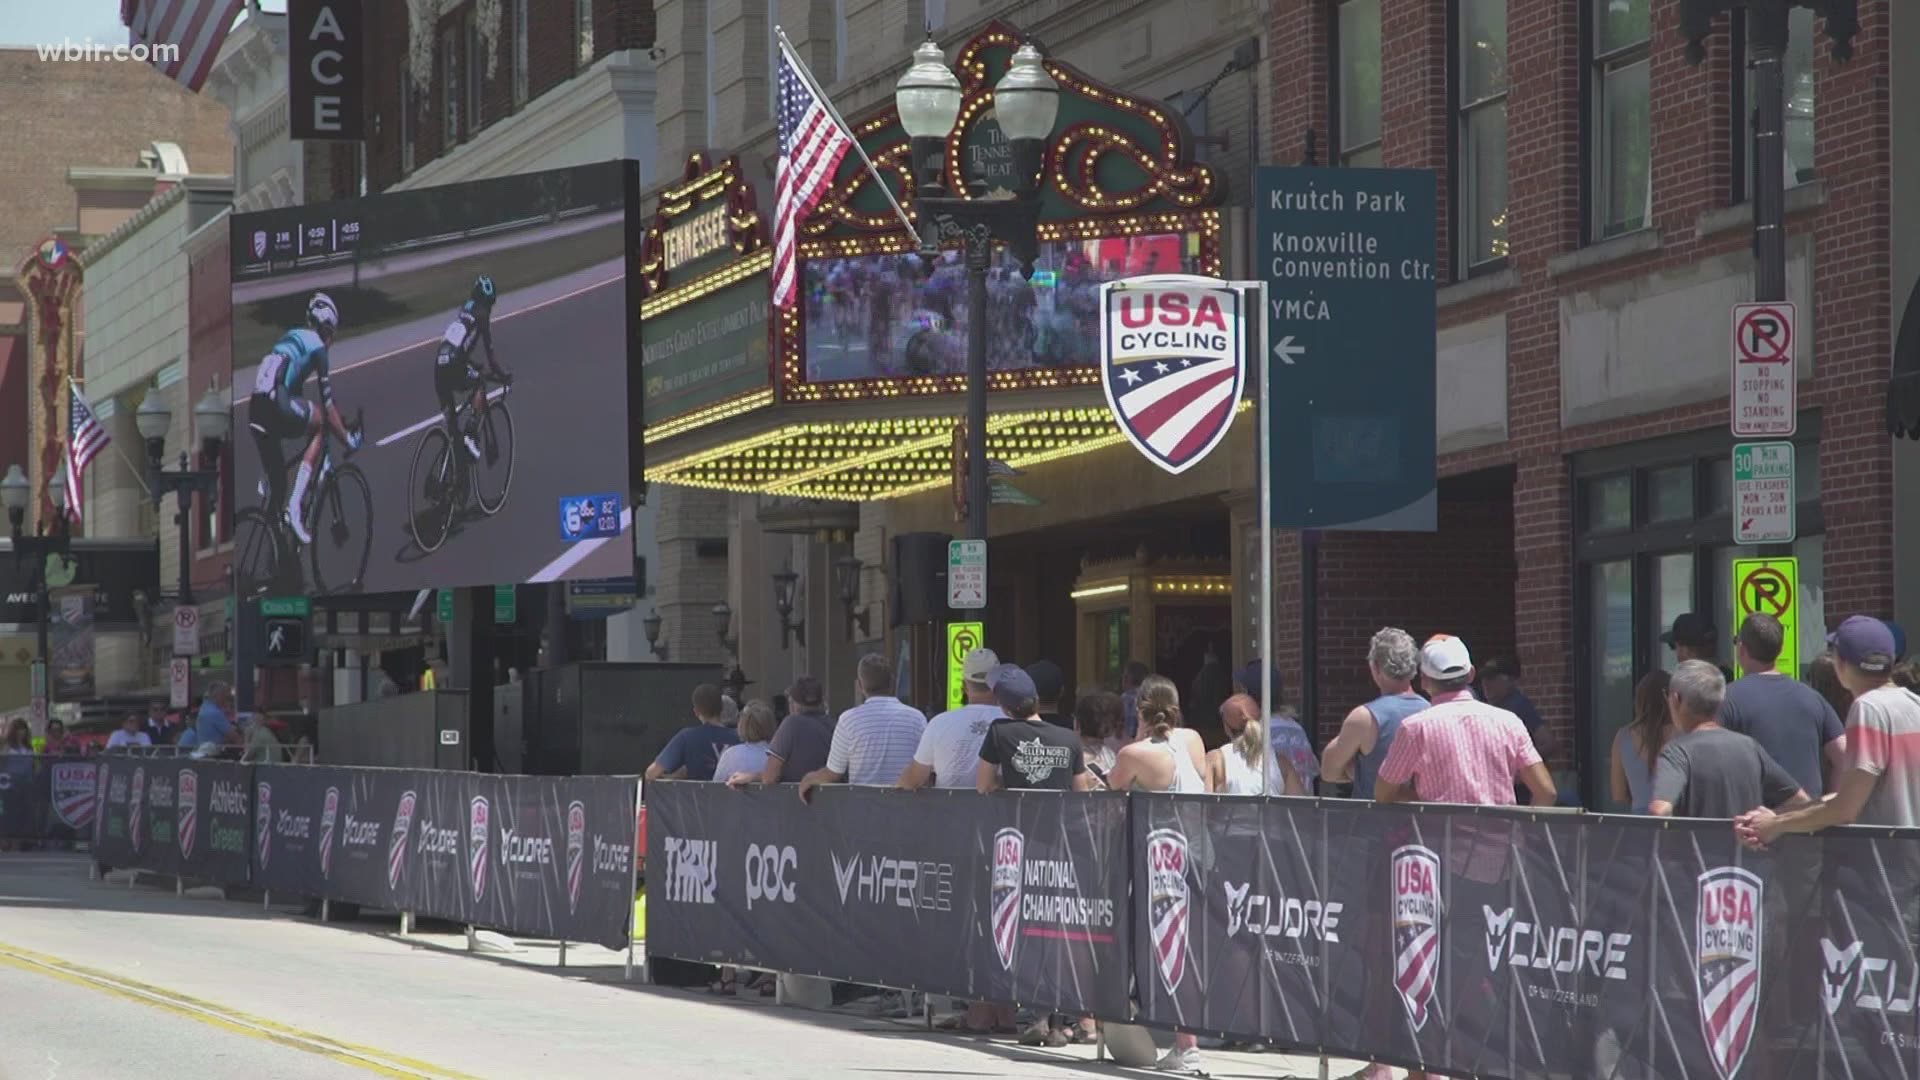 The USA Cycling National Championships wrapped up this weekend after six events.